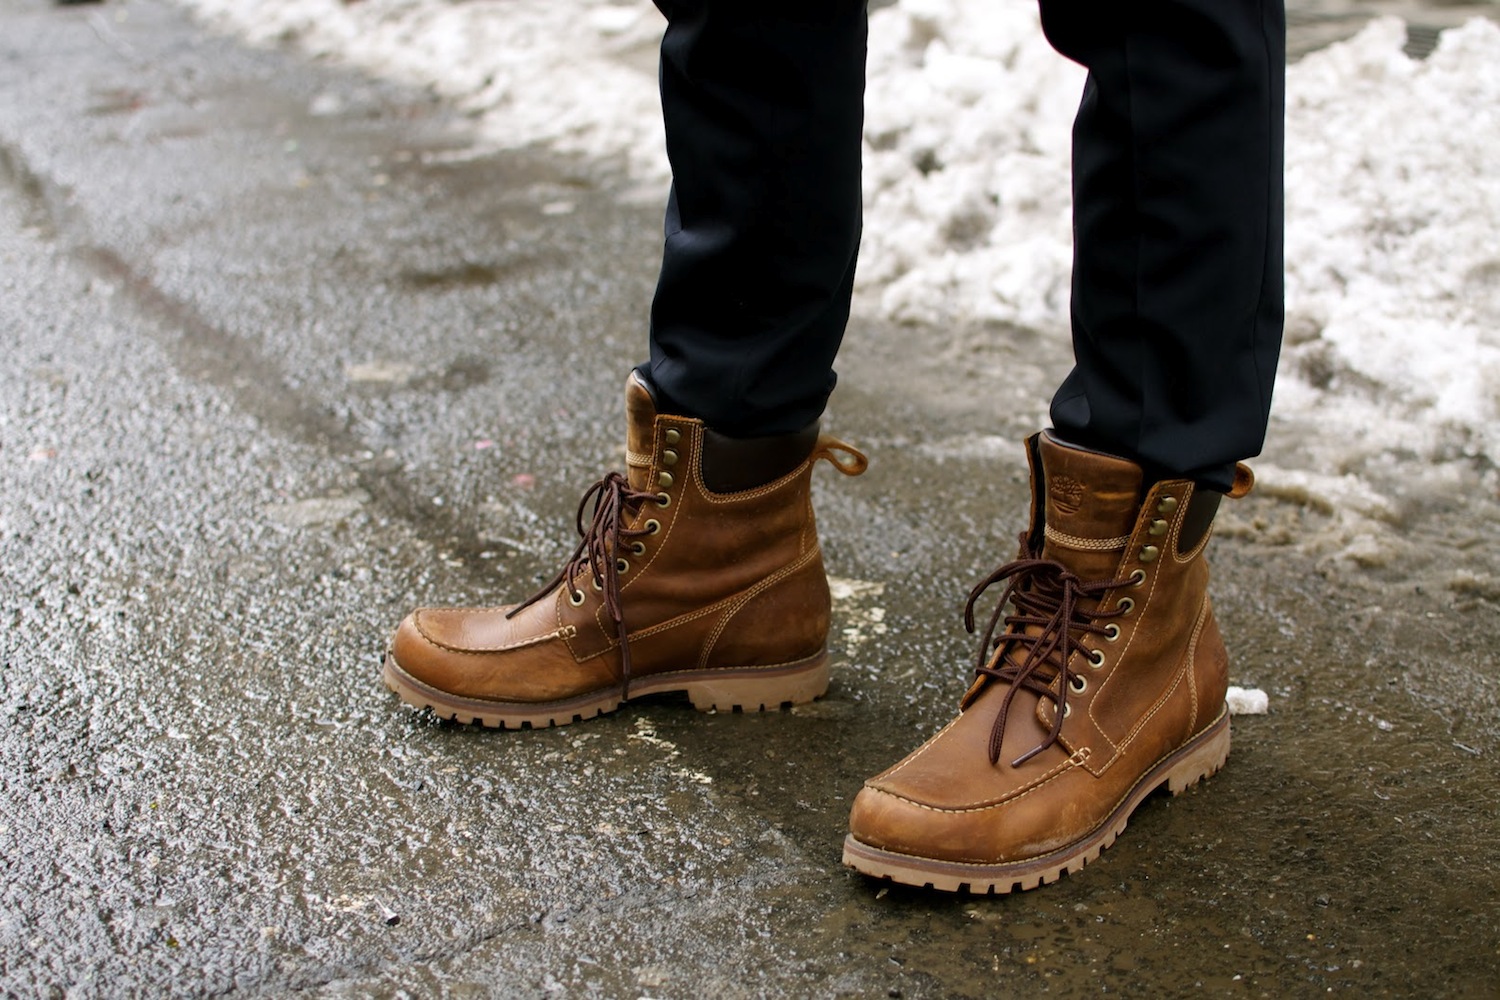 Buying the winter boots for men